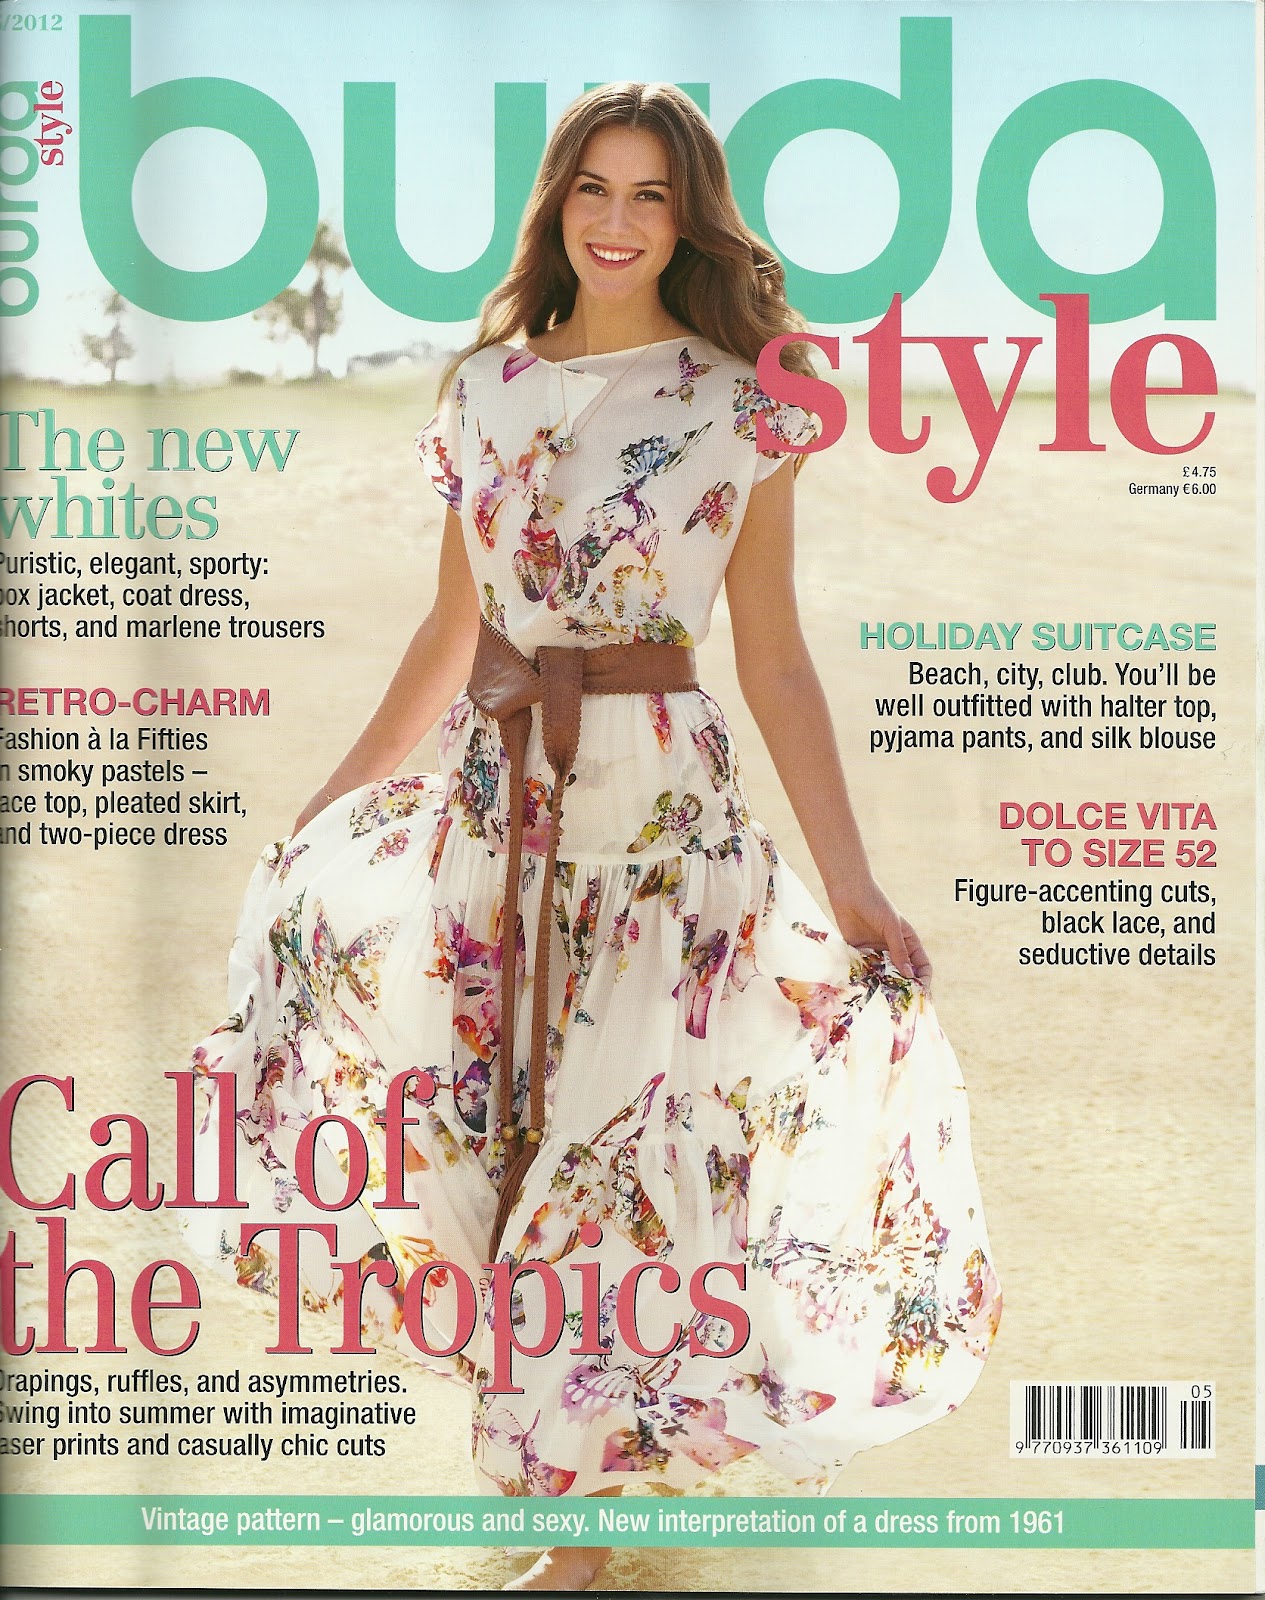 Sorbet Surprise gets Sew Crafty!: Burda Style May 2012 Magazine Review